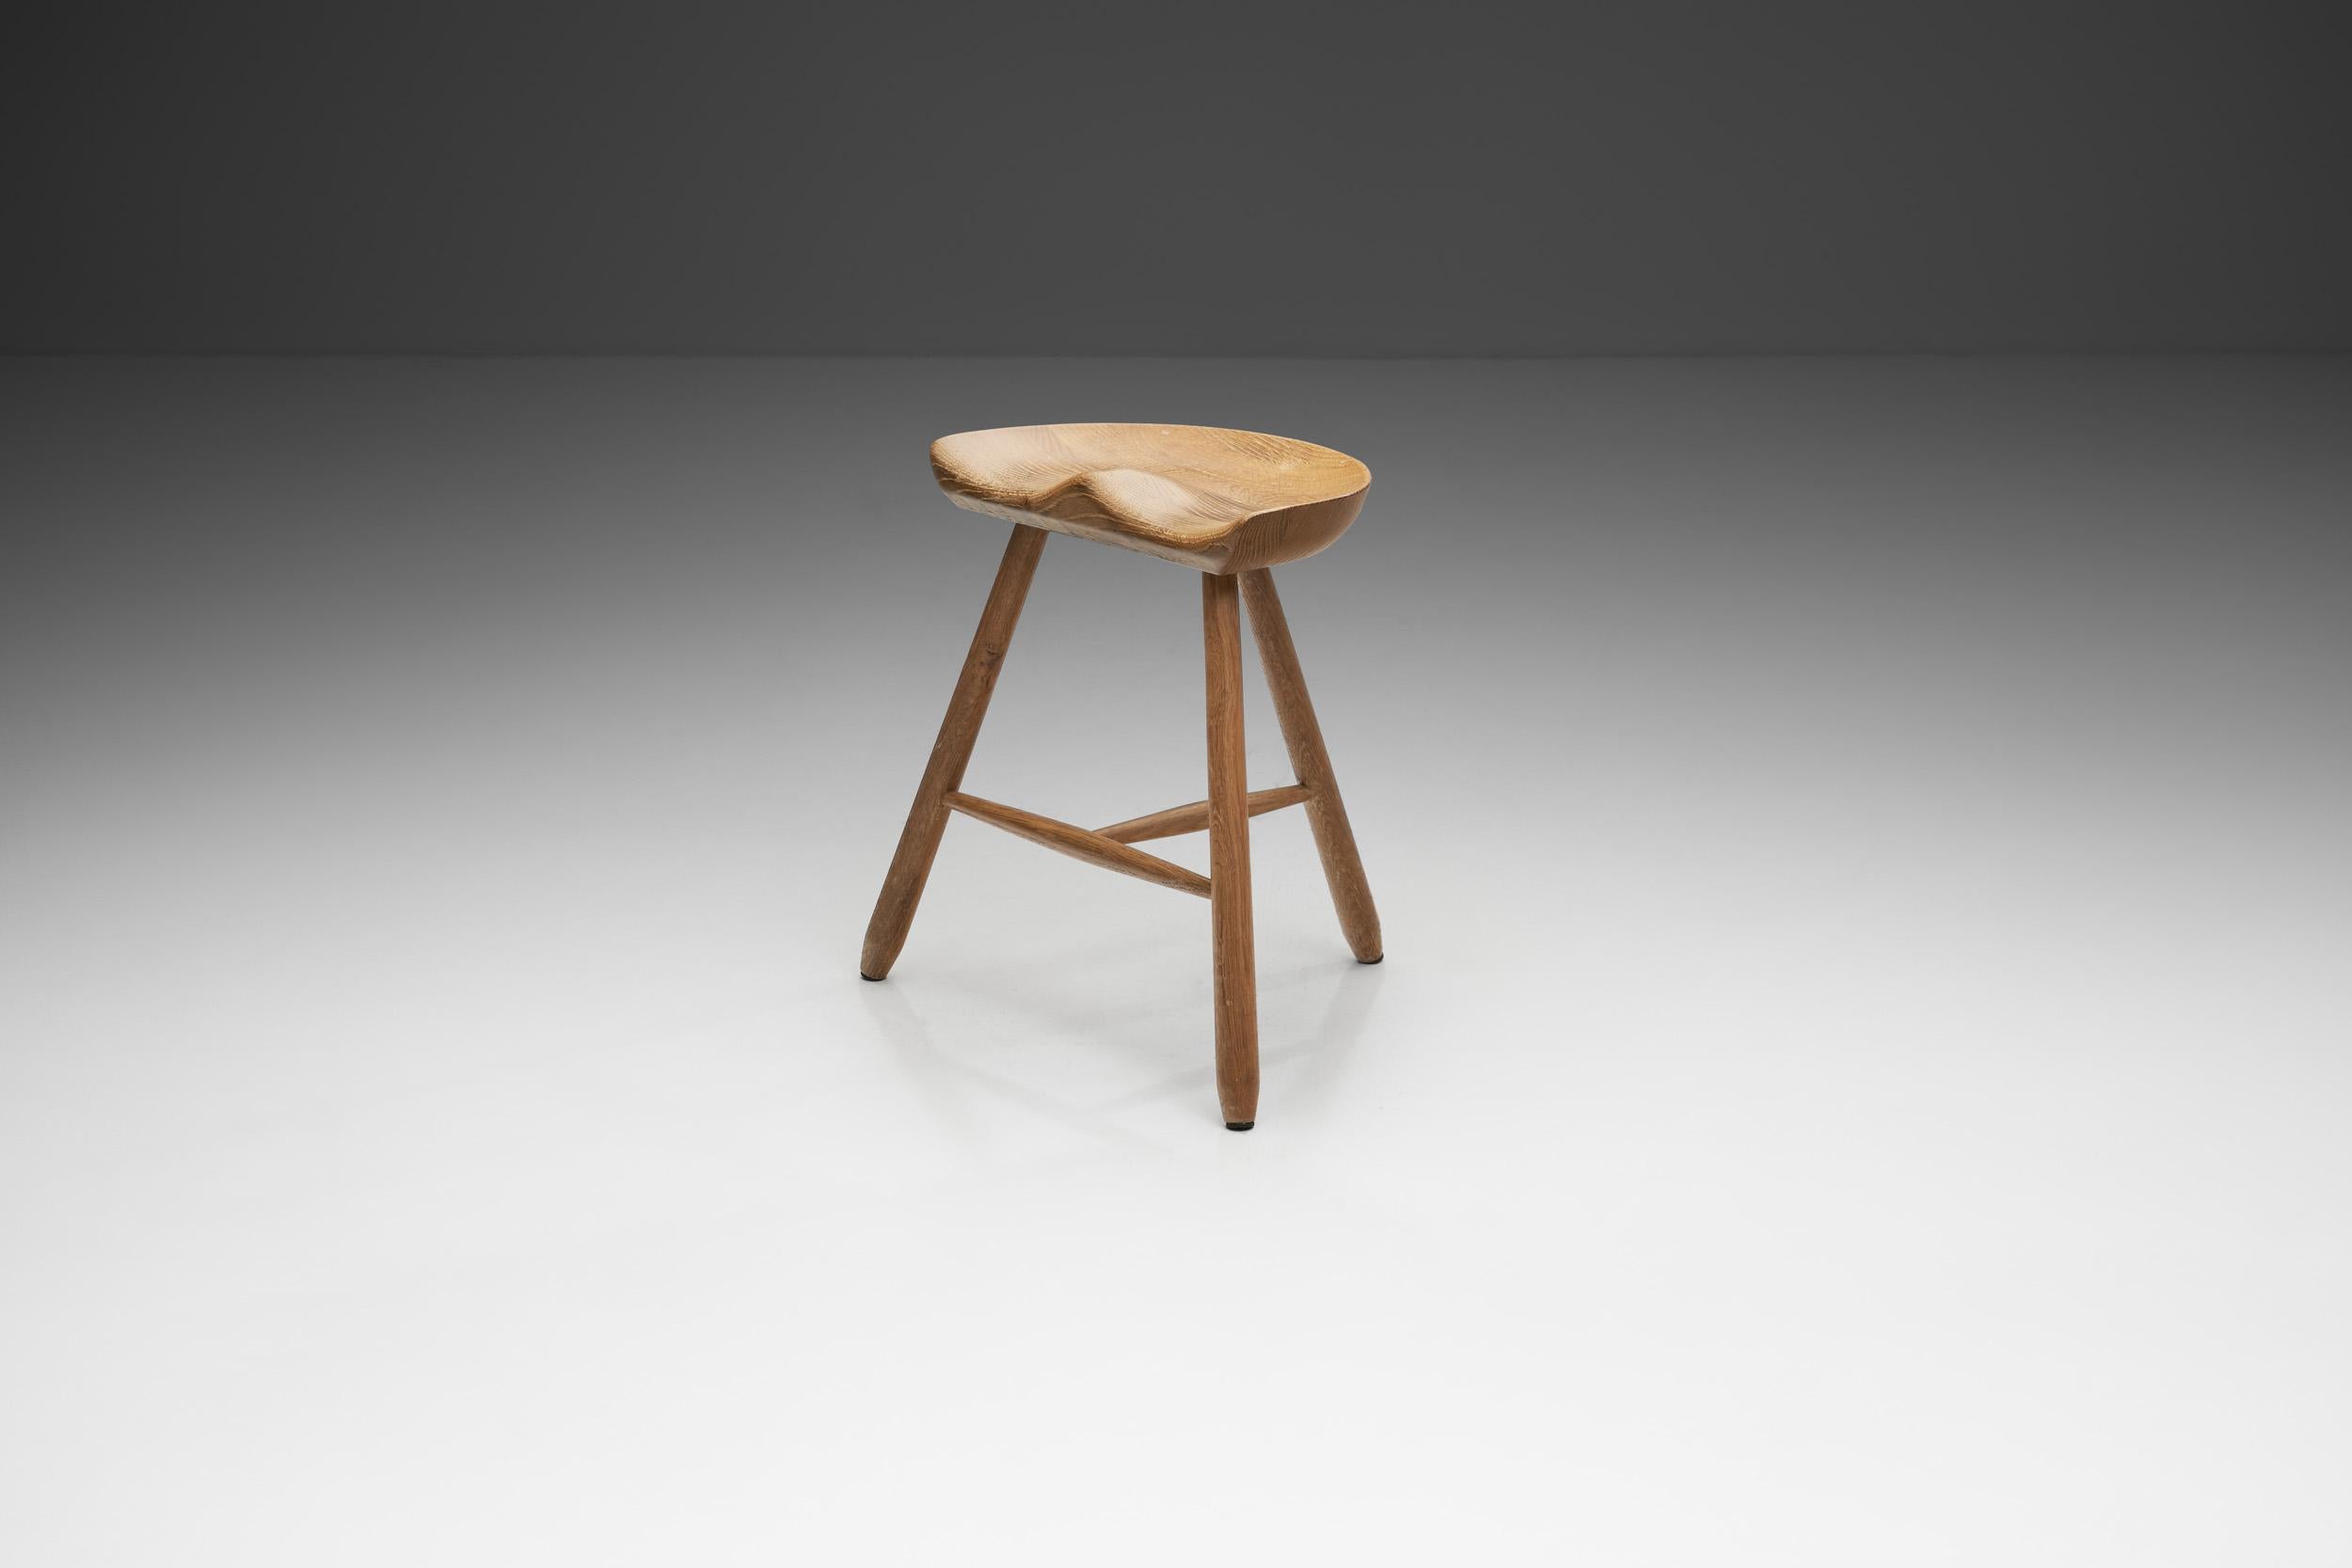 Functional design is the evident guiding principle of many Scandinavian pieces from the early mid-century, and there is hardly a better example than this oak stool. In earlier days, similar “shoemaker” stools were often used in the home for informal